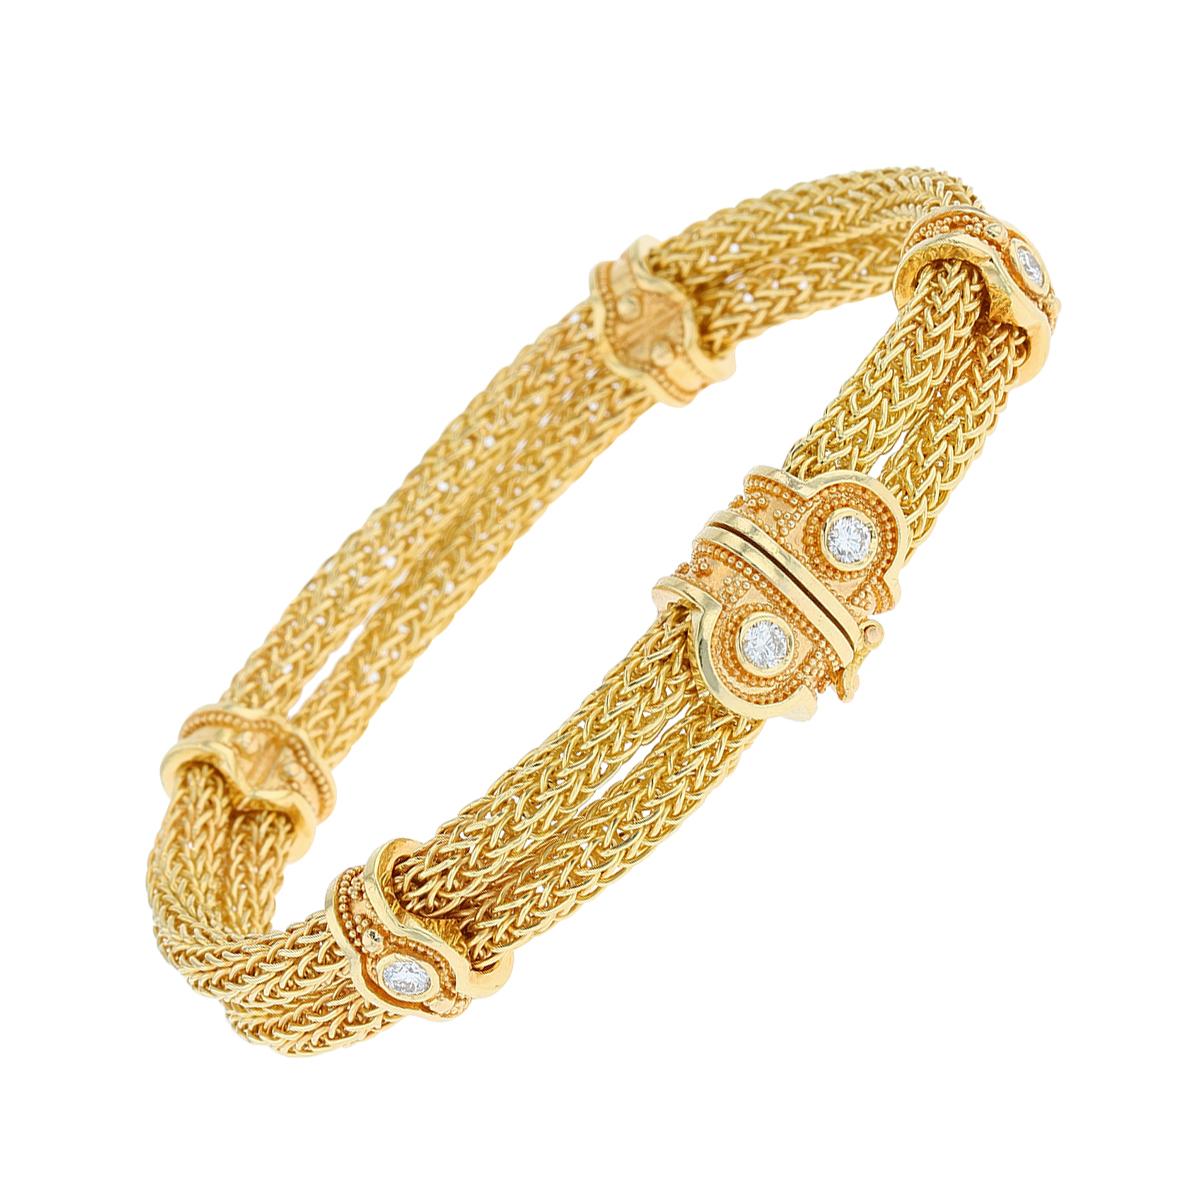 Kent Raible Double Woven Chain Bracelet with Diamonds and Gold Granulation